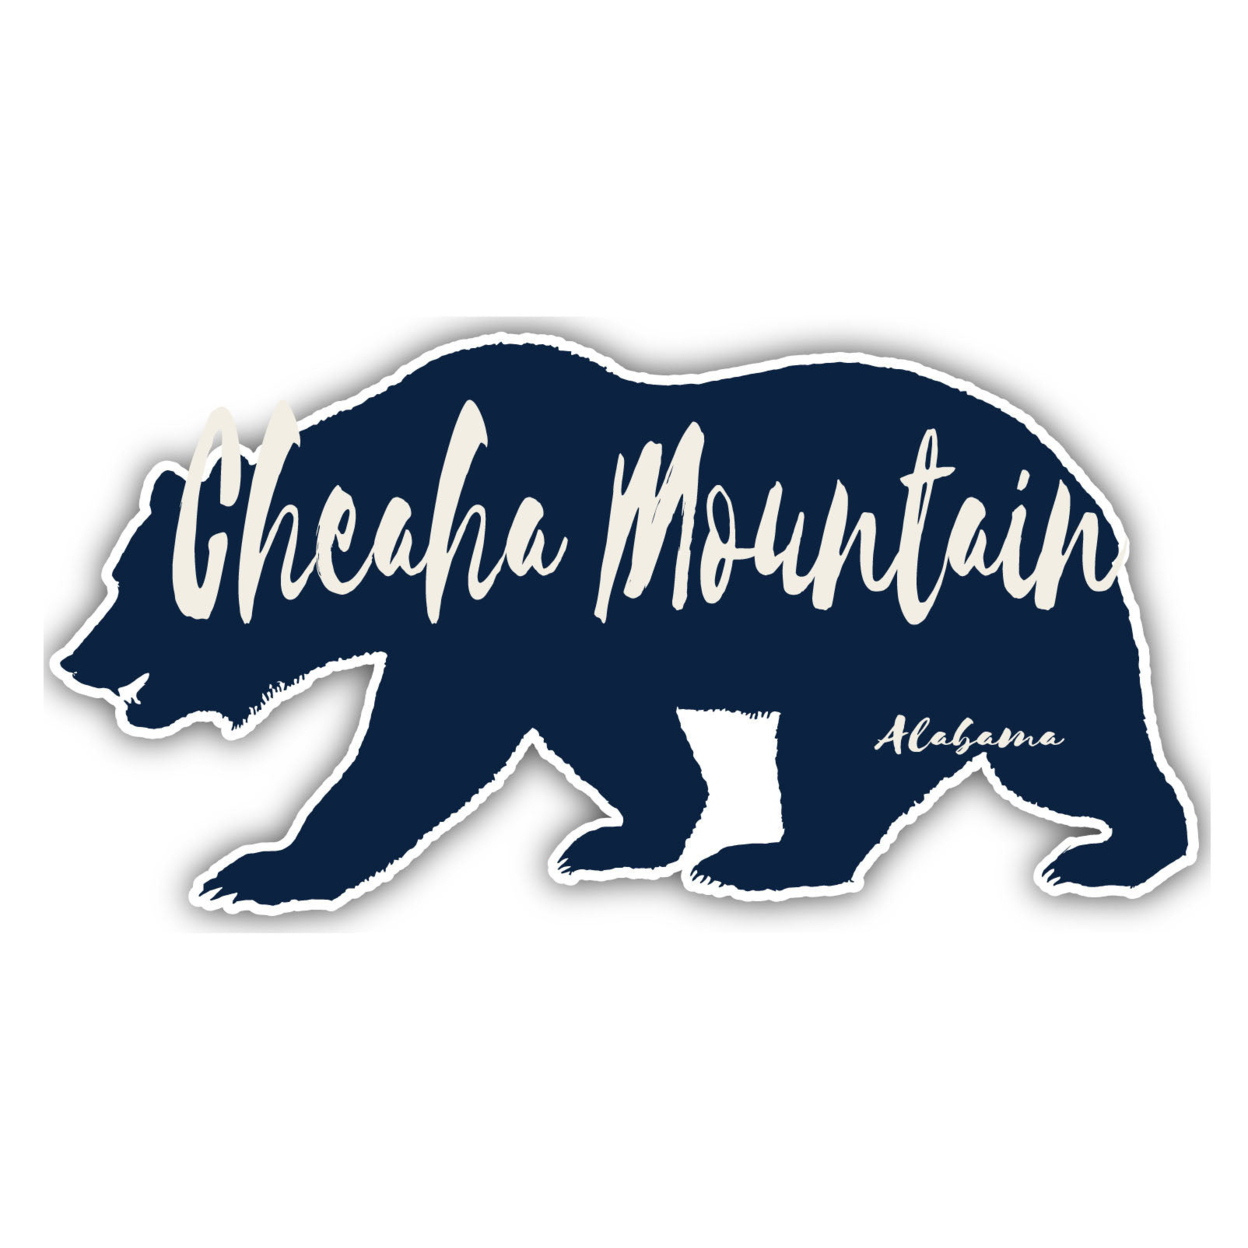 Cheaha Mountain Alabama Souvenir Decorative Stickers (Choose Theme And Size) - 4-Pack, 2-Inch, Tent